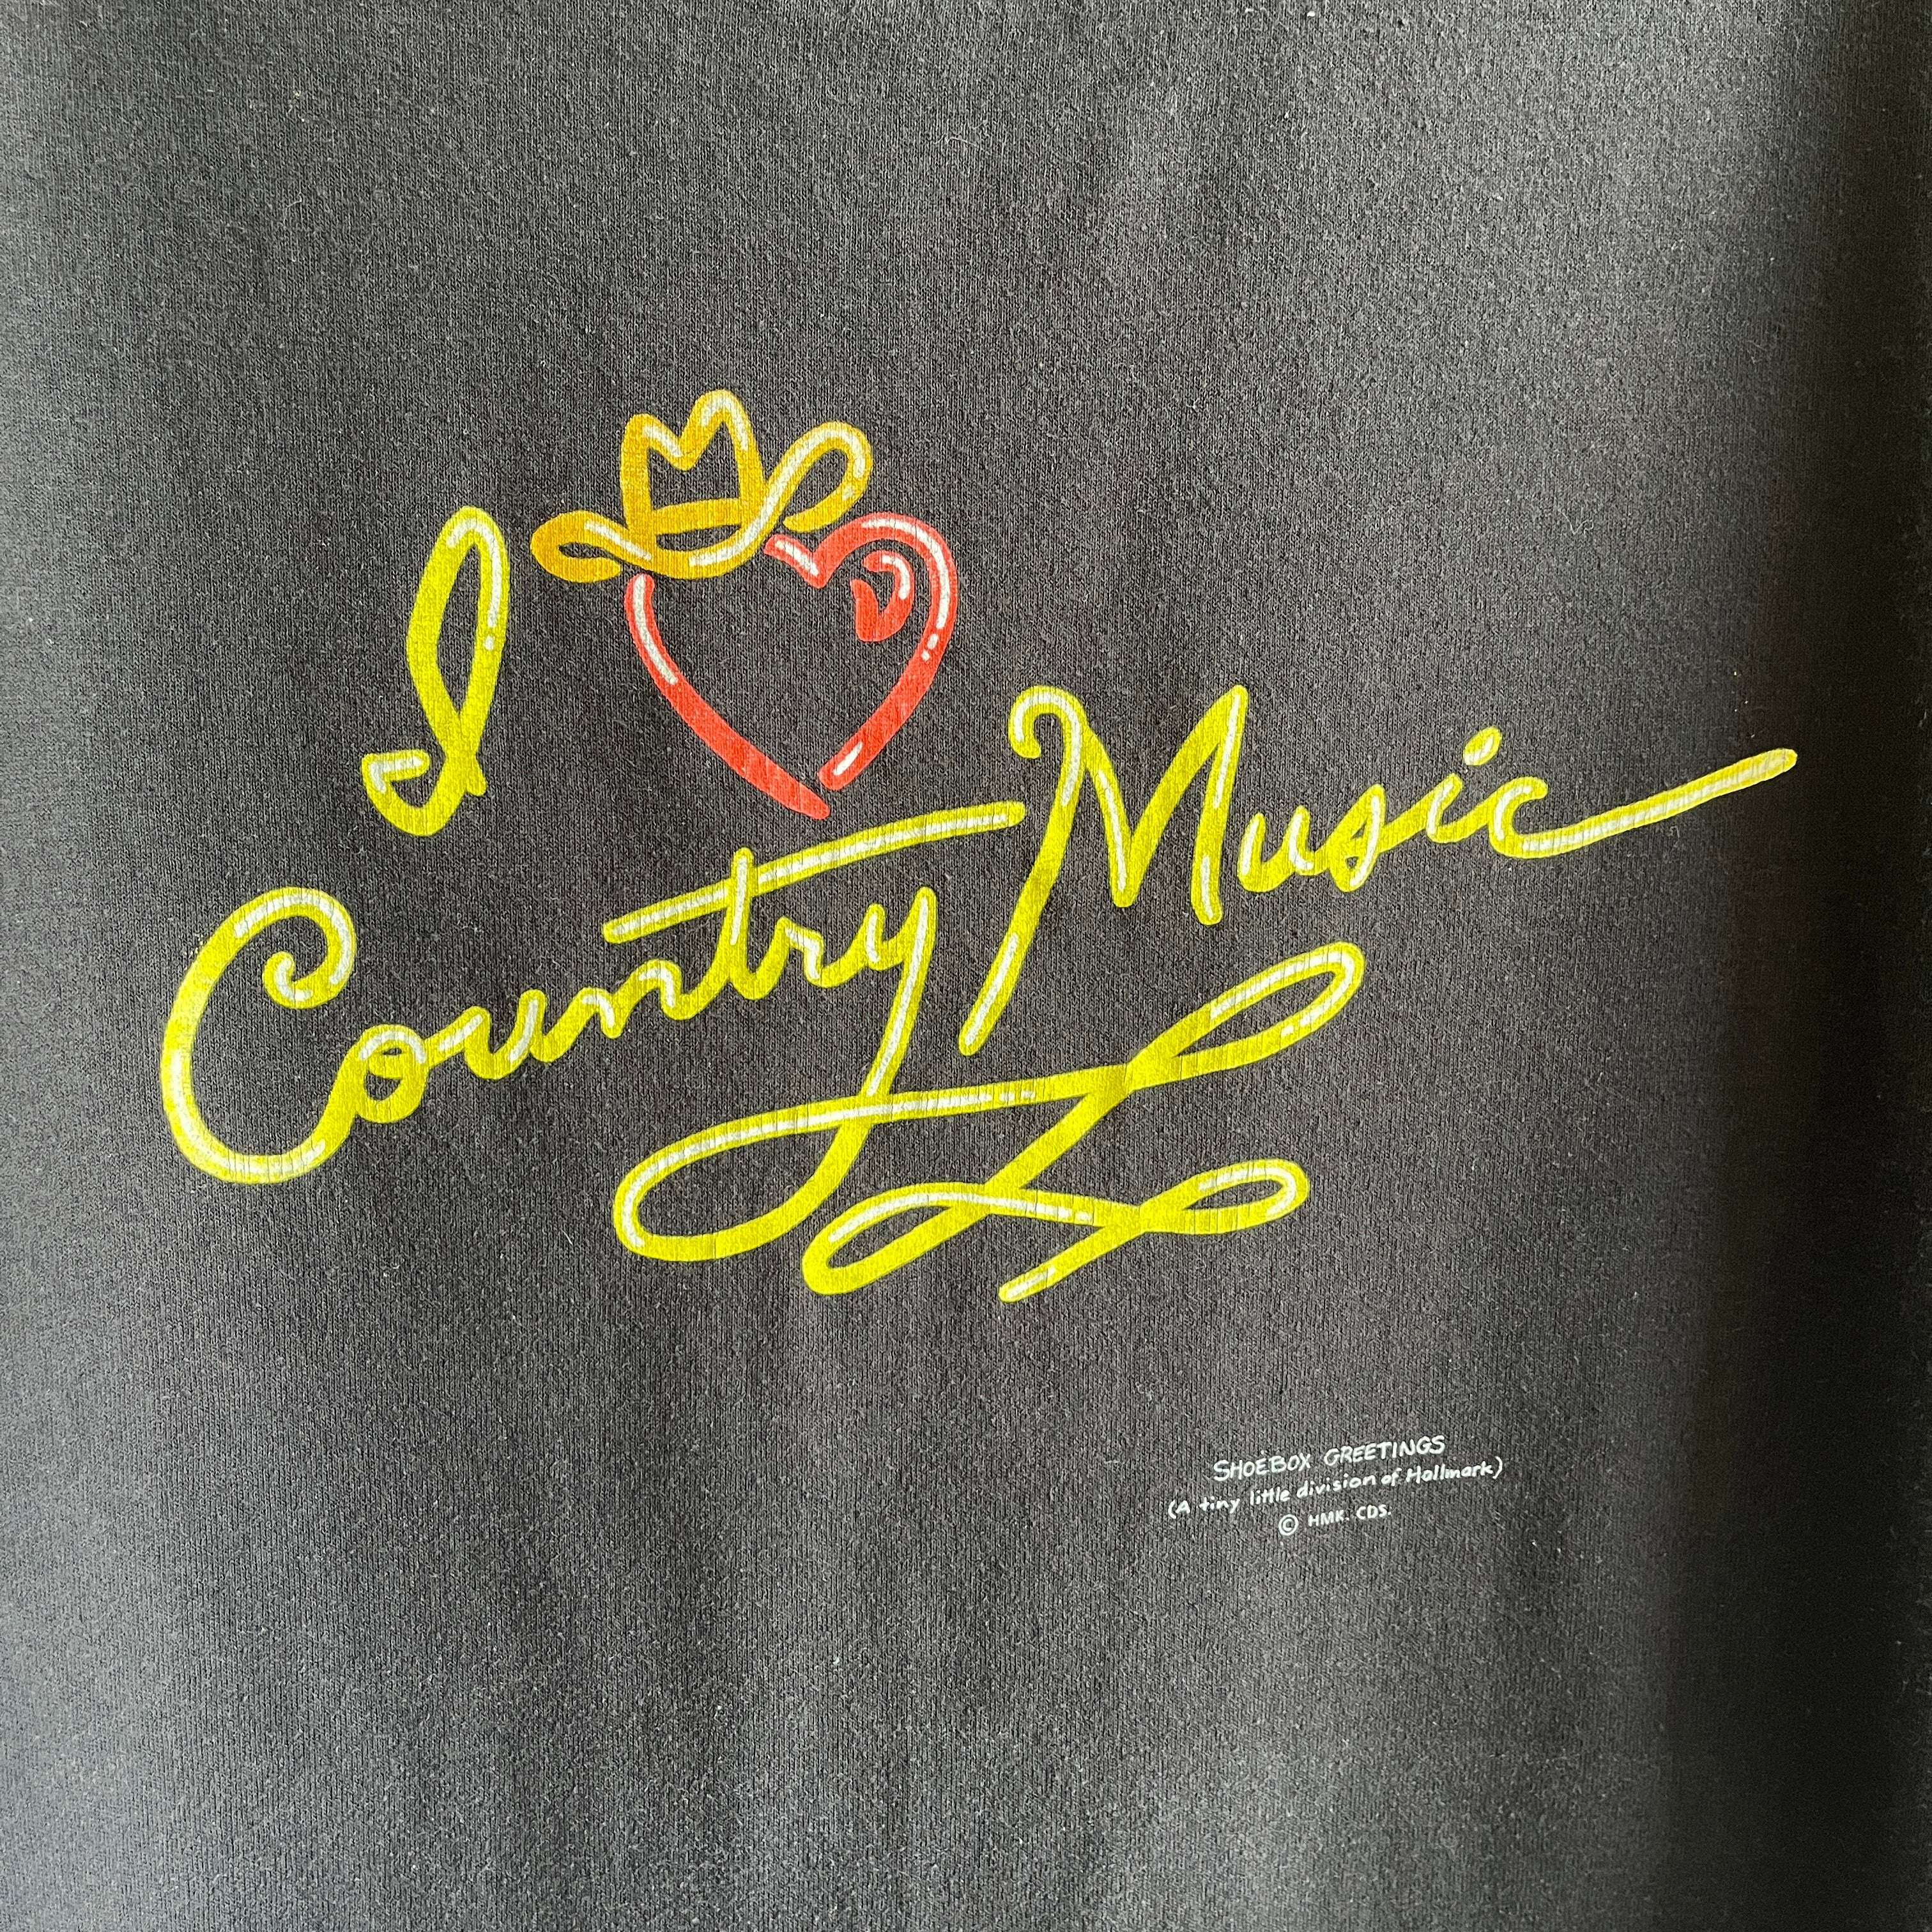 1990s I Love Country Music T-Shirt by Shoebox